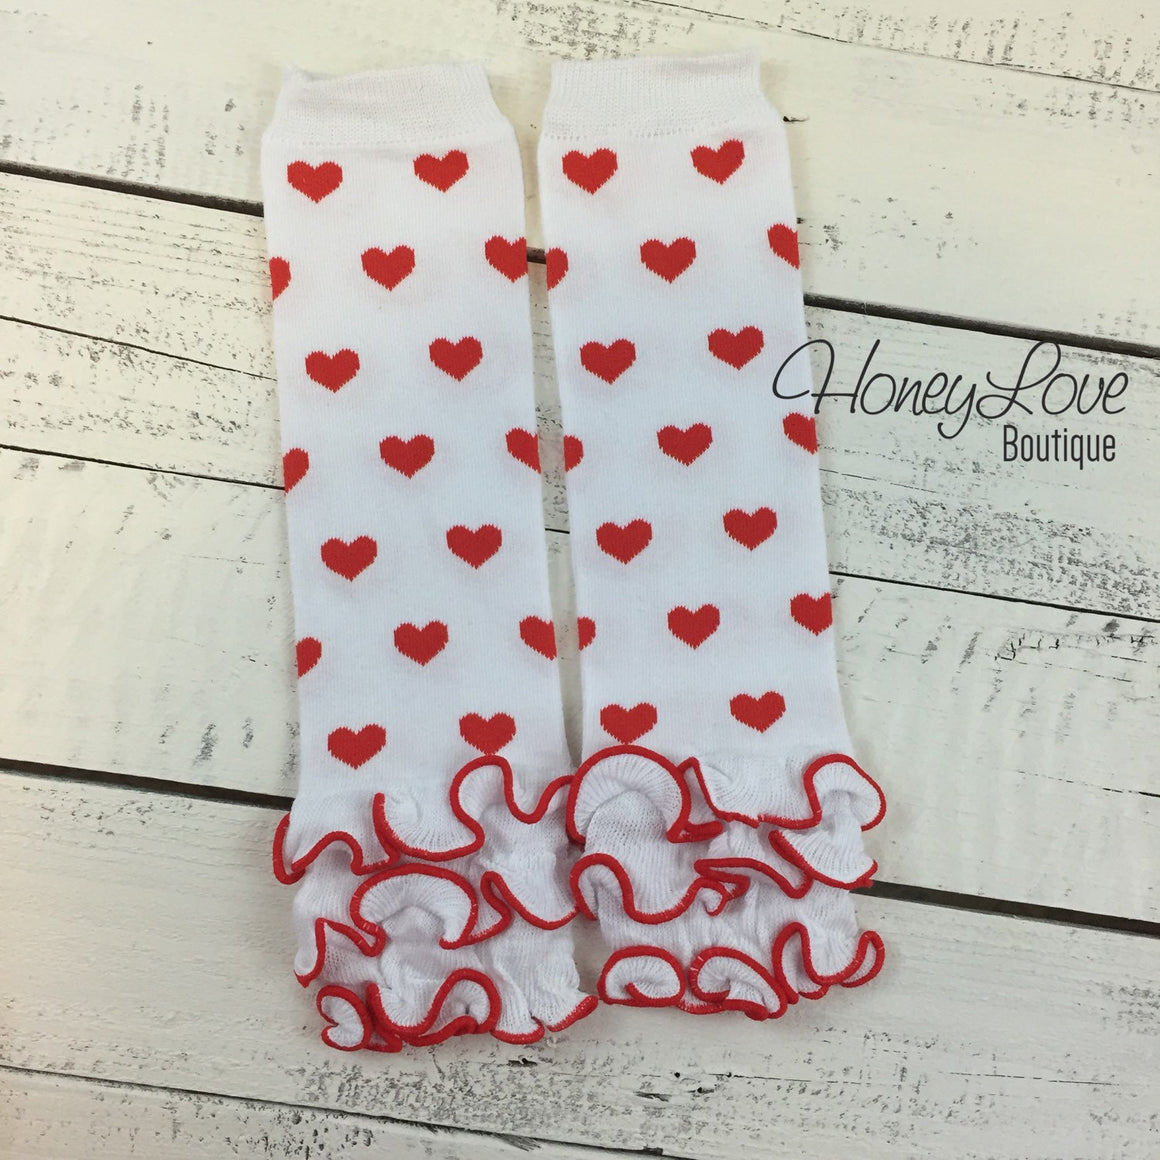 Red and White heart leg warmers, red flower headband, ruffle bottom bloomers - HoneyLoveBoutique